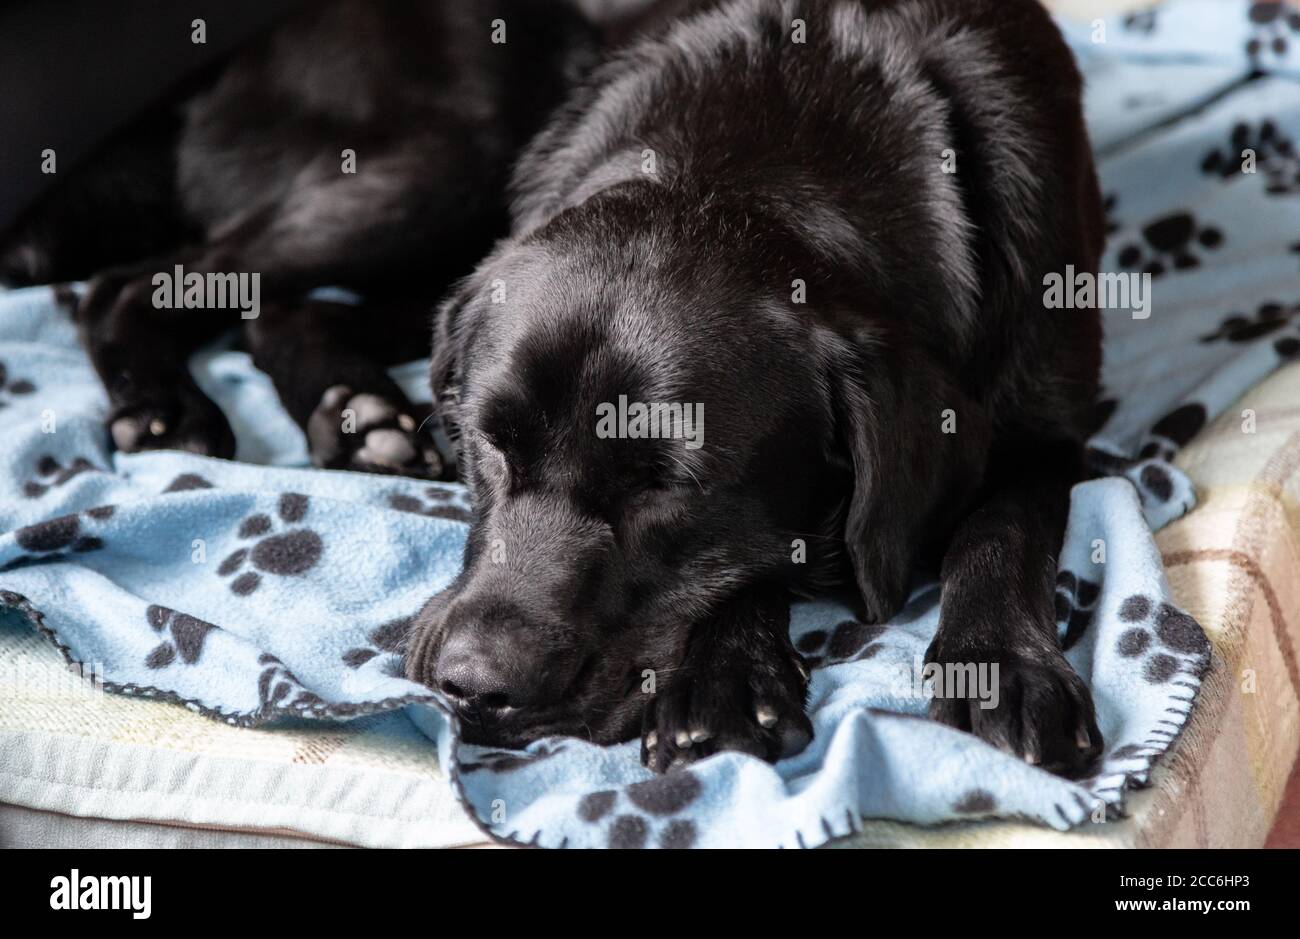 A black labrador retriever sleeping on a dog bed covered in a blanket. Stock Photo